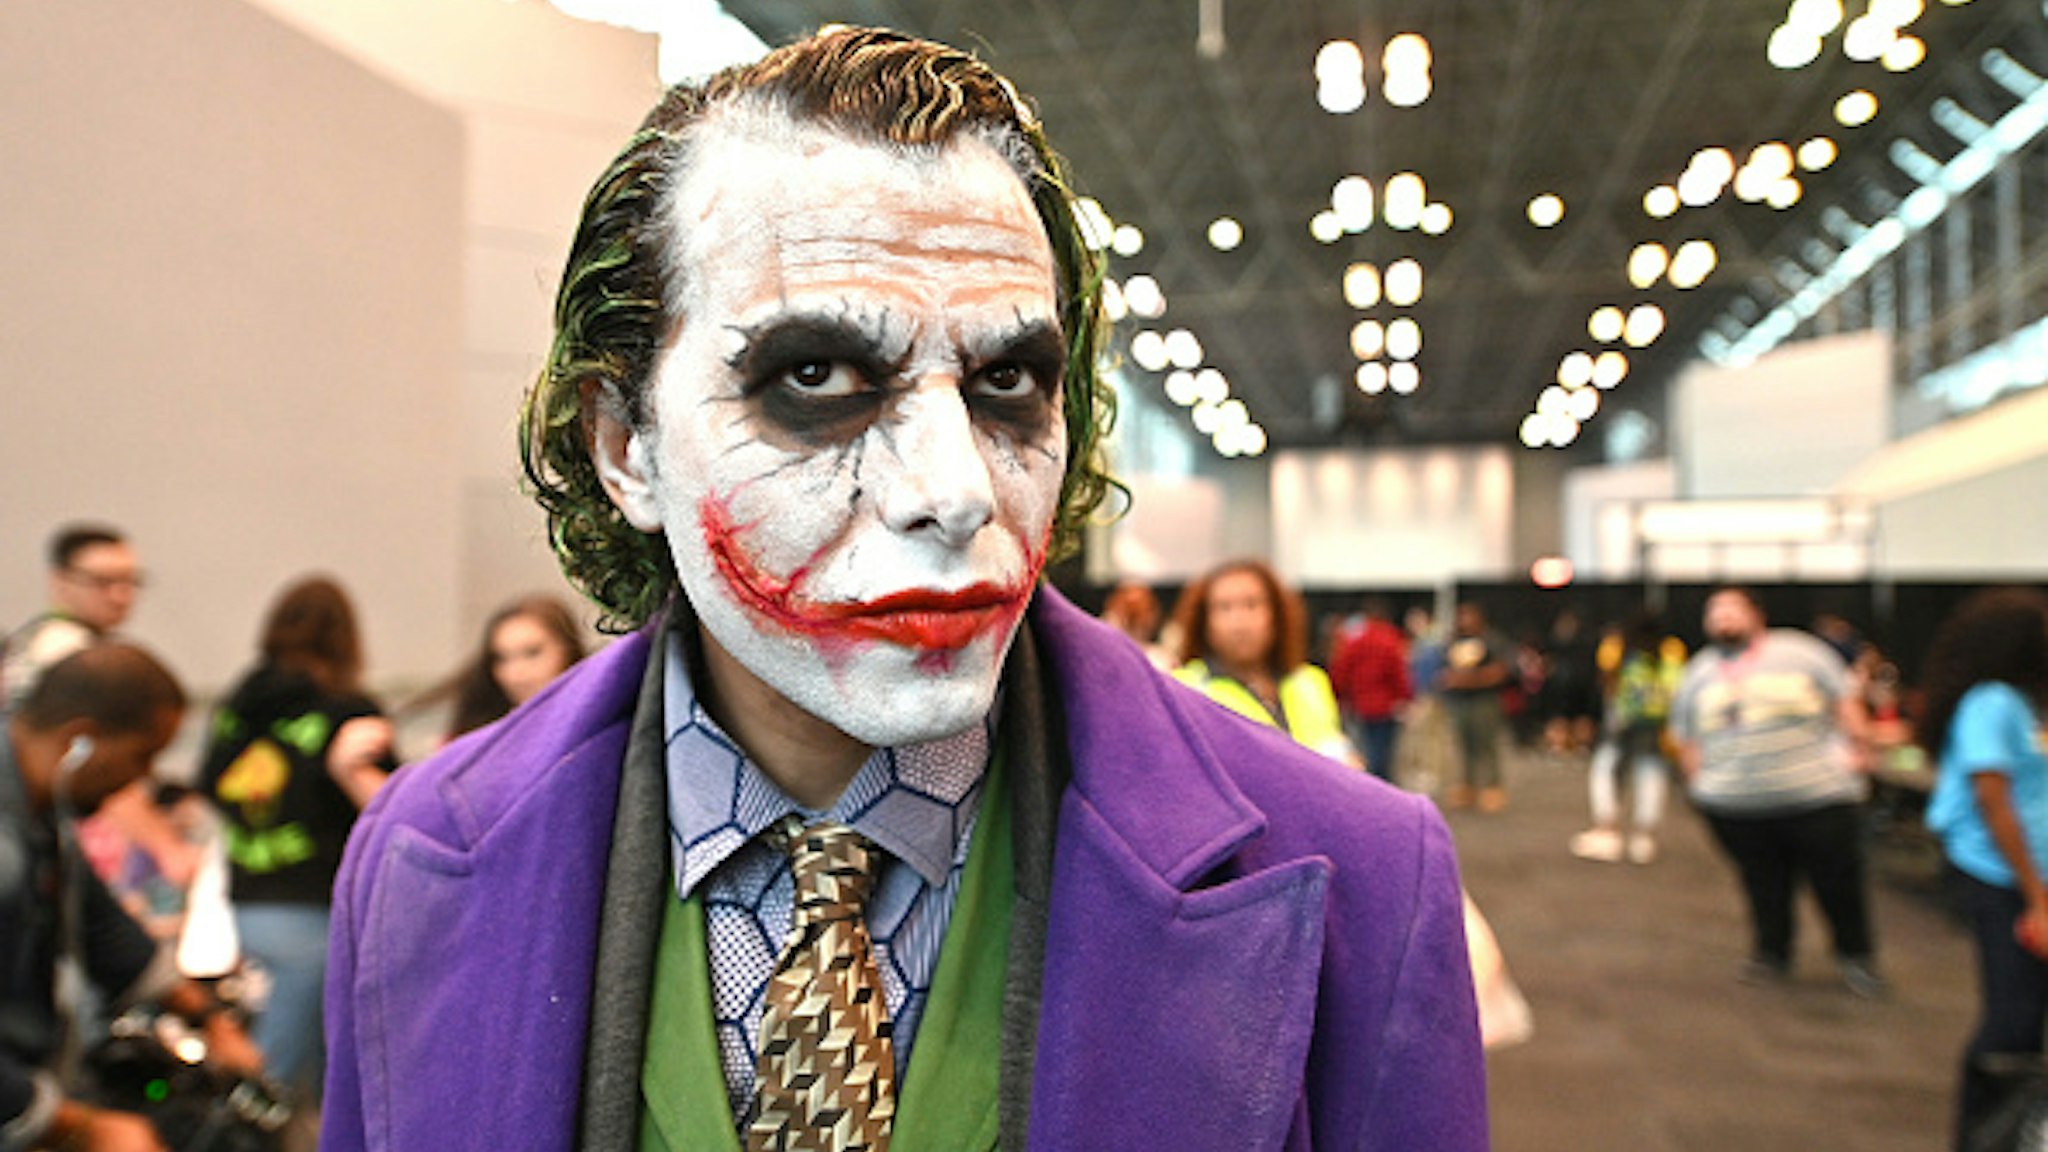 NEW YORK, NEW YORK - OCTOBER 03: A cosplayer dressed as The Joker attends the New York Comic Con at Jacob K. Javits Convention Center on October 03, 2019 in New York City.